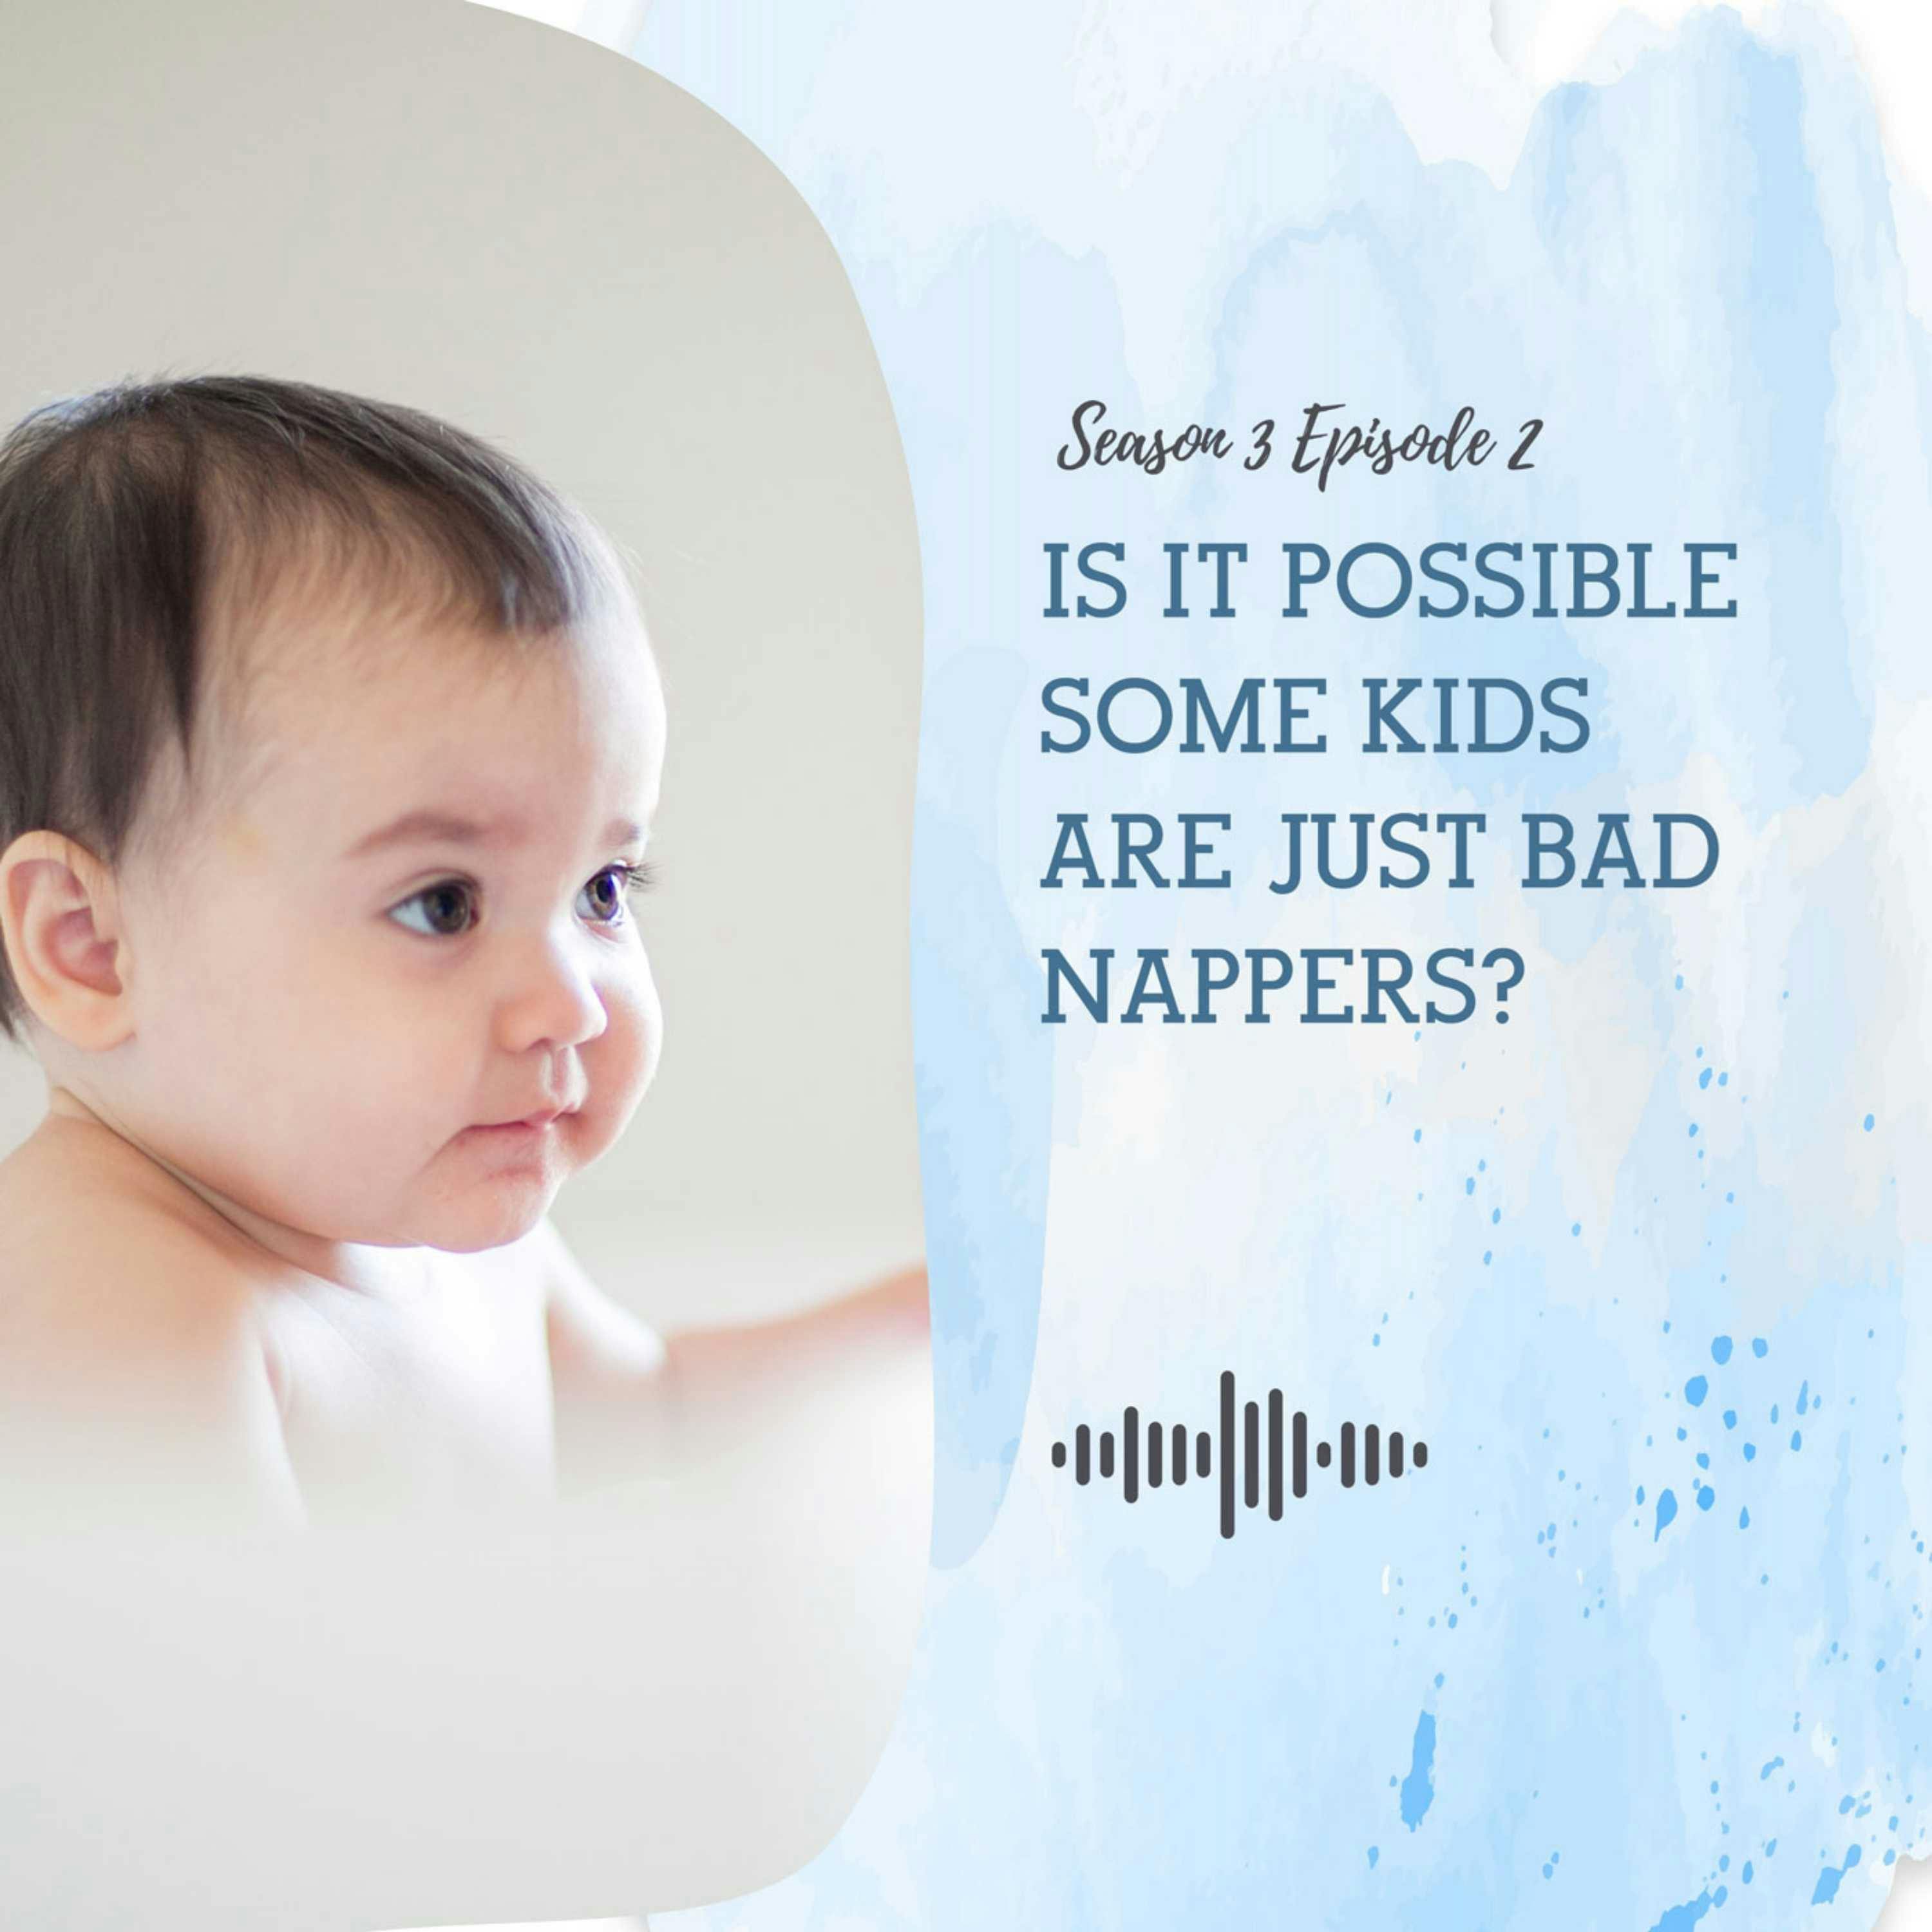 S3 EP2: IS IT POSSIBLE THAT SOME KIDS ARE JUST BAD NAPPERS?